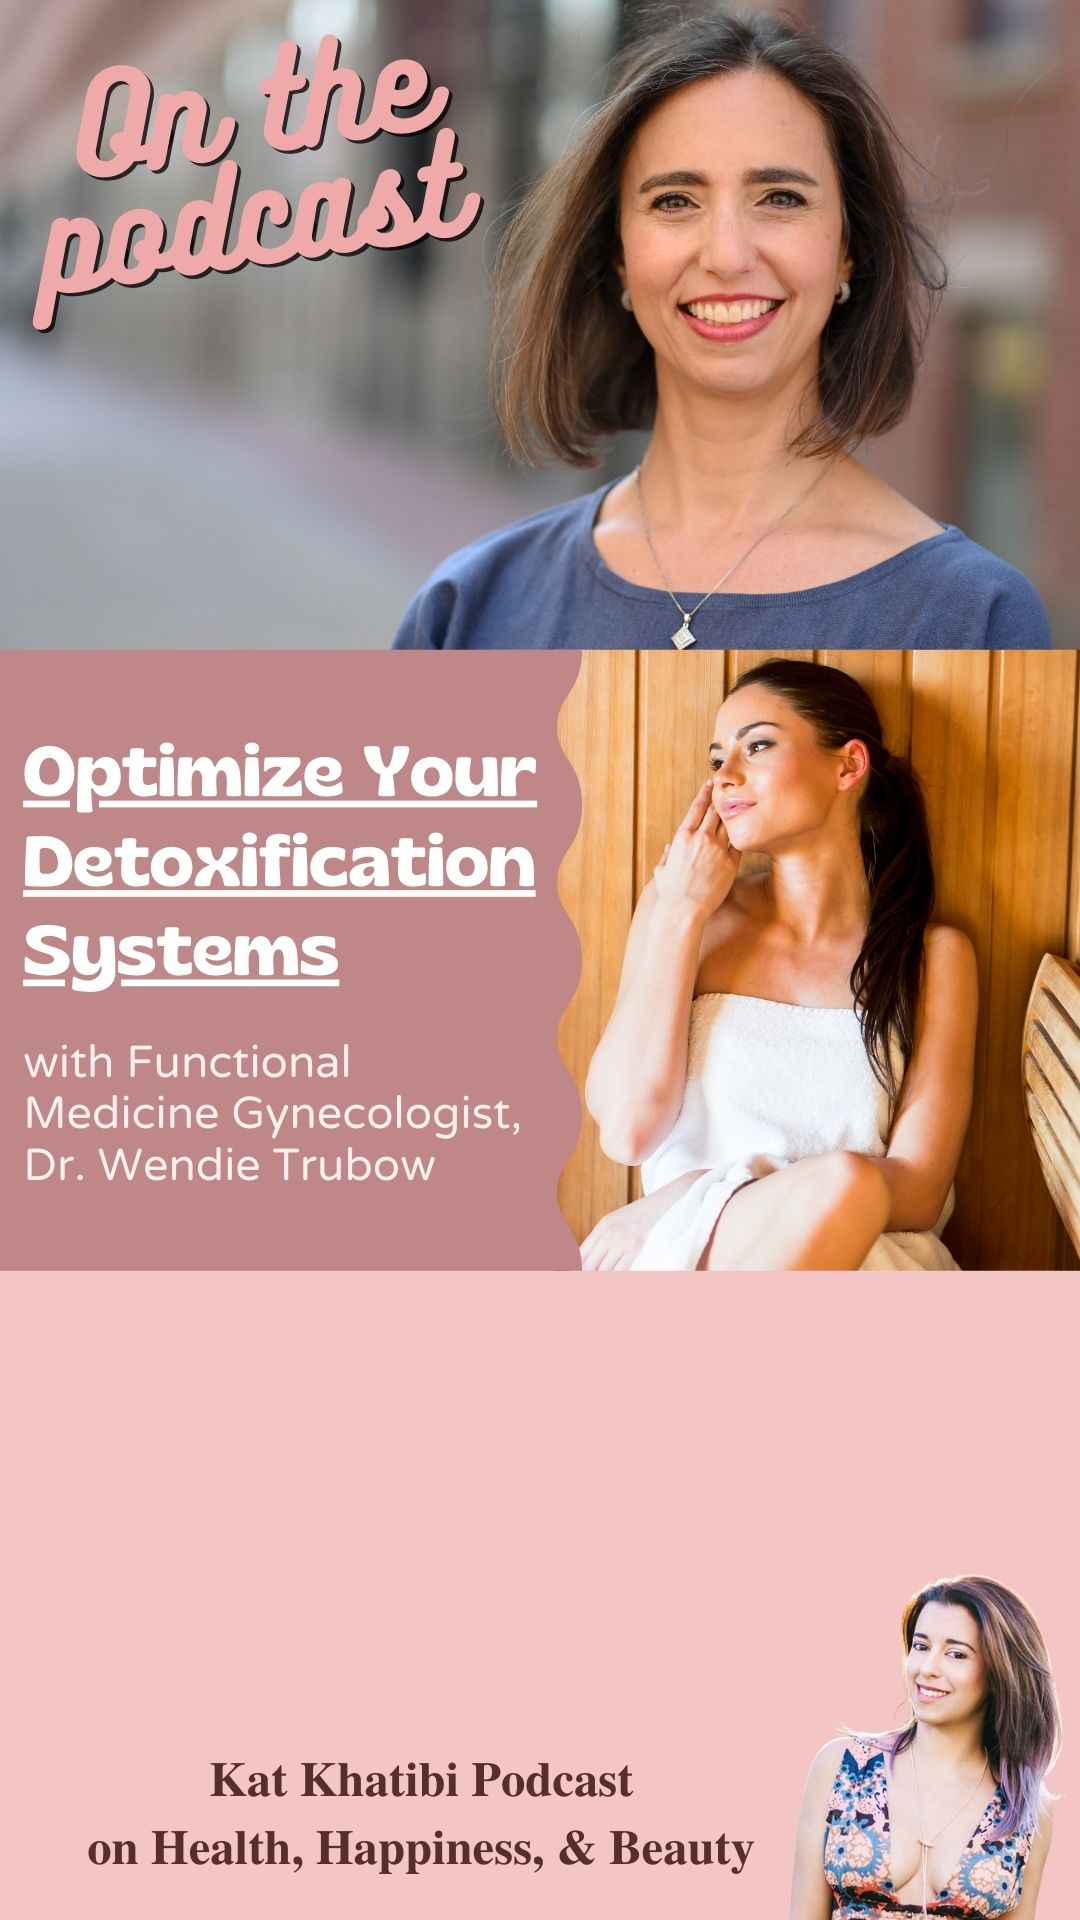 Optimize Your Detoxification Systems with Functional Medicine Gynecologist, Dr. Wendie Trubow